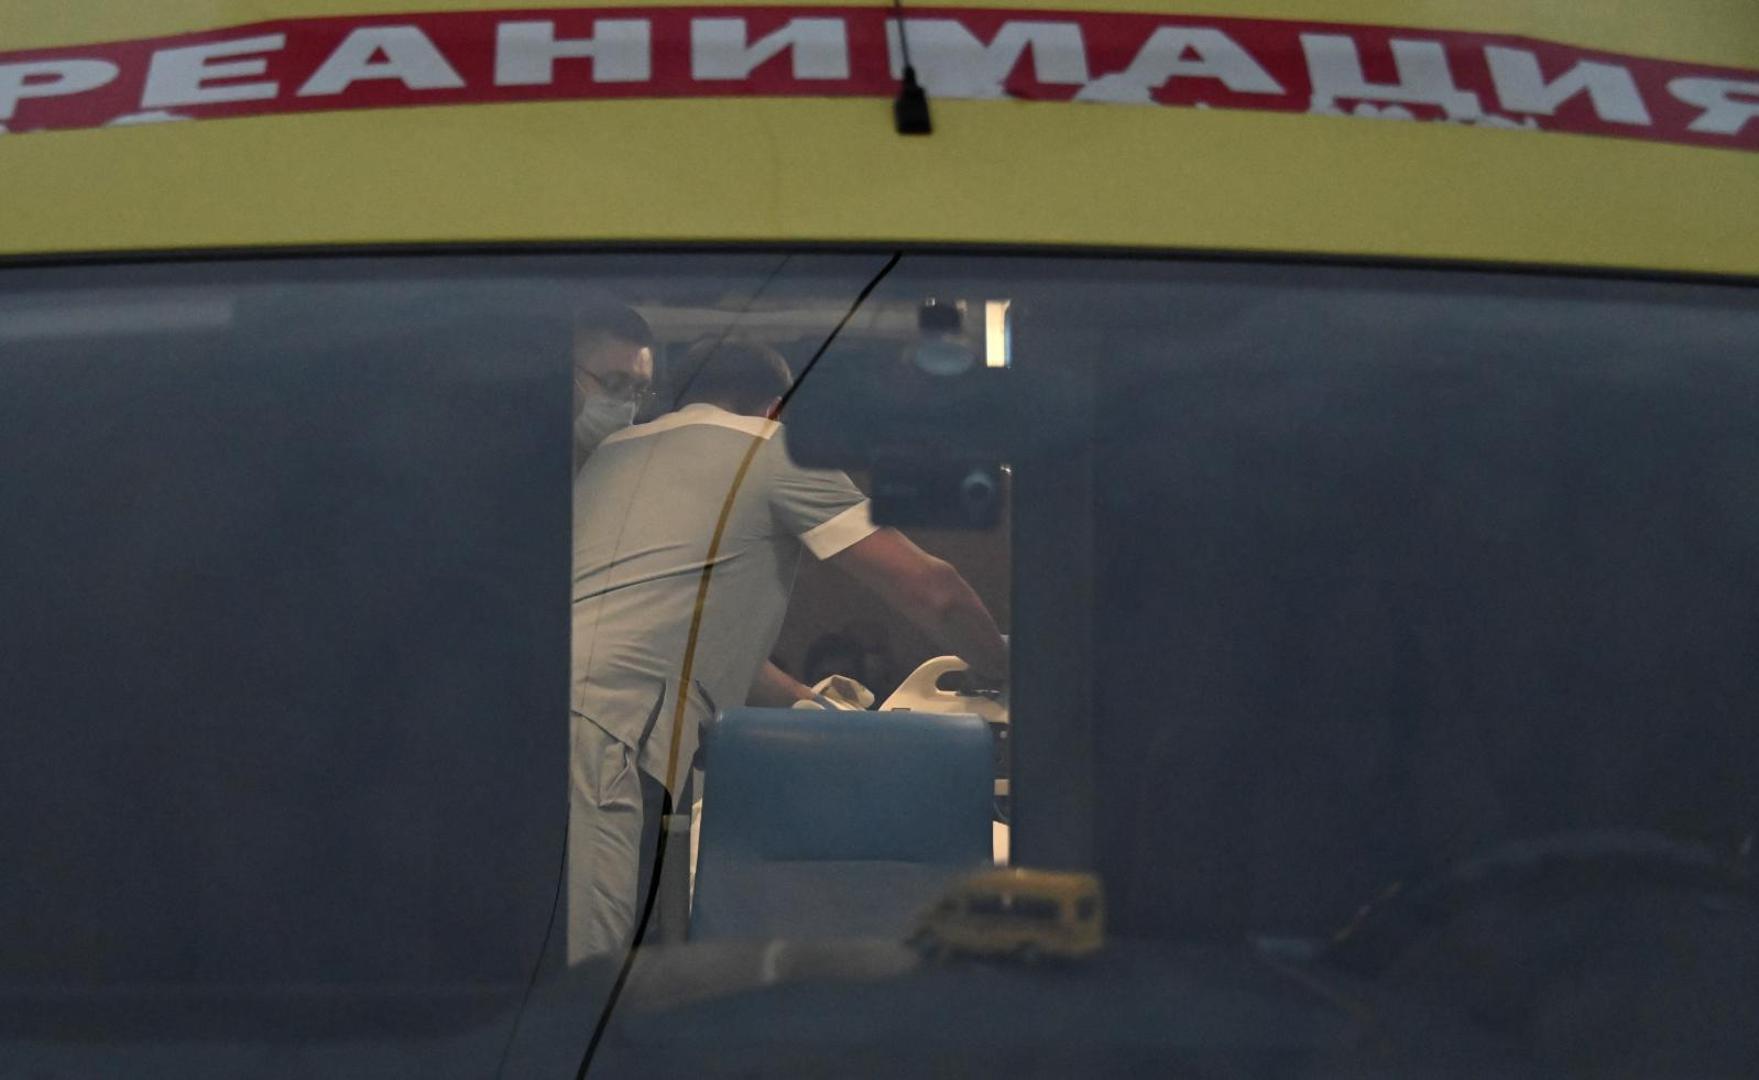 An ambulance transporting Russian opposition leader Alexei Navalny drives out of a hospital in Omsk Medical specialists surround Russian opposition leader Alexei Navalny inside an ambulance near a hospital before driving to an airport in Omsk, Russia August 22, 2020. Alexei Navalny was taken ill with suspected poisoning en route from Tomsk to Moscow on a plane, which made an emergency landing in Omsk. The local hospital delivering medical support to Navalny later allowed German doctors to fly him to Germany for treatment. REUTERS/Alexey Malgavko ALEXEY MALGAVKO